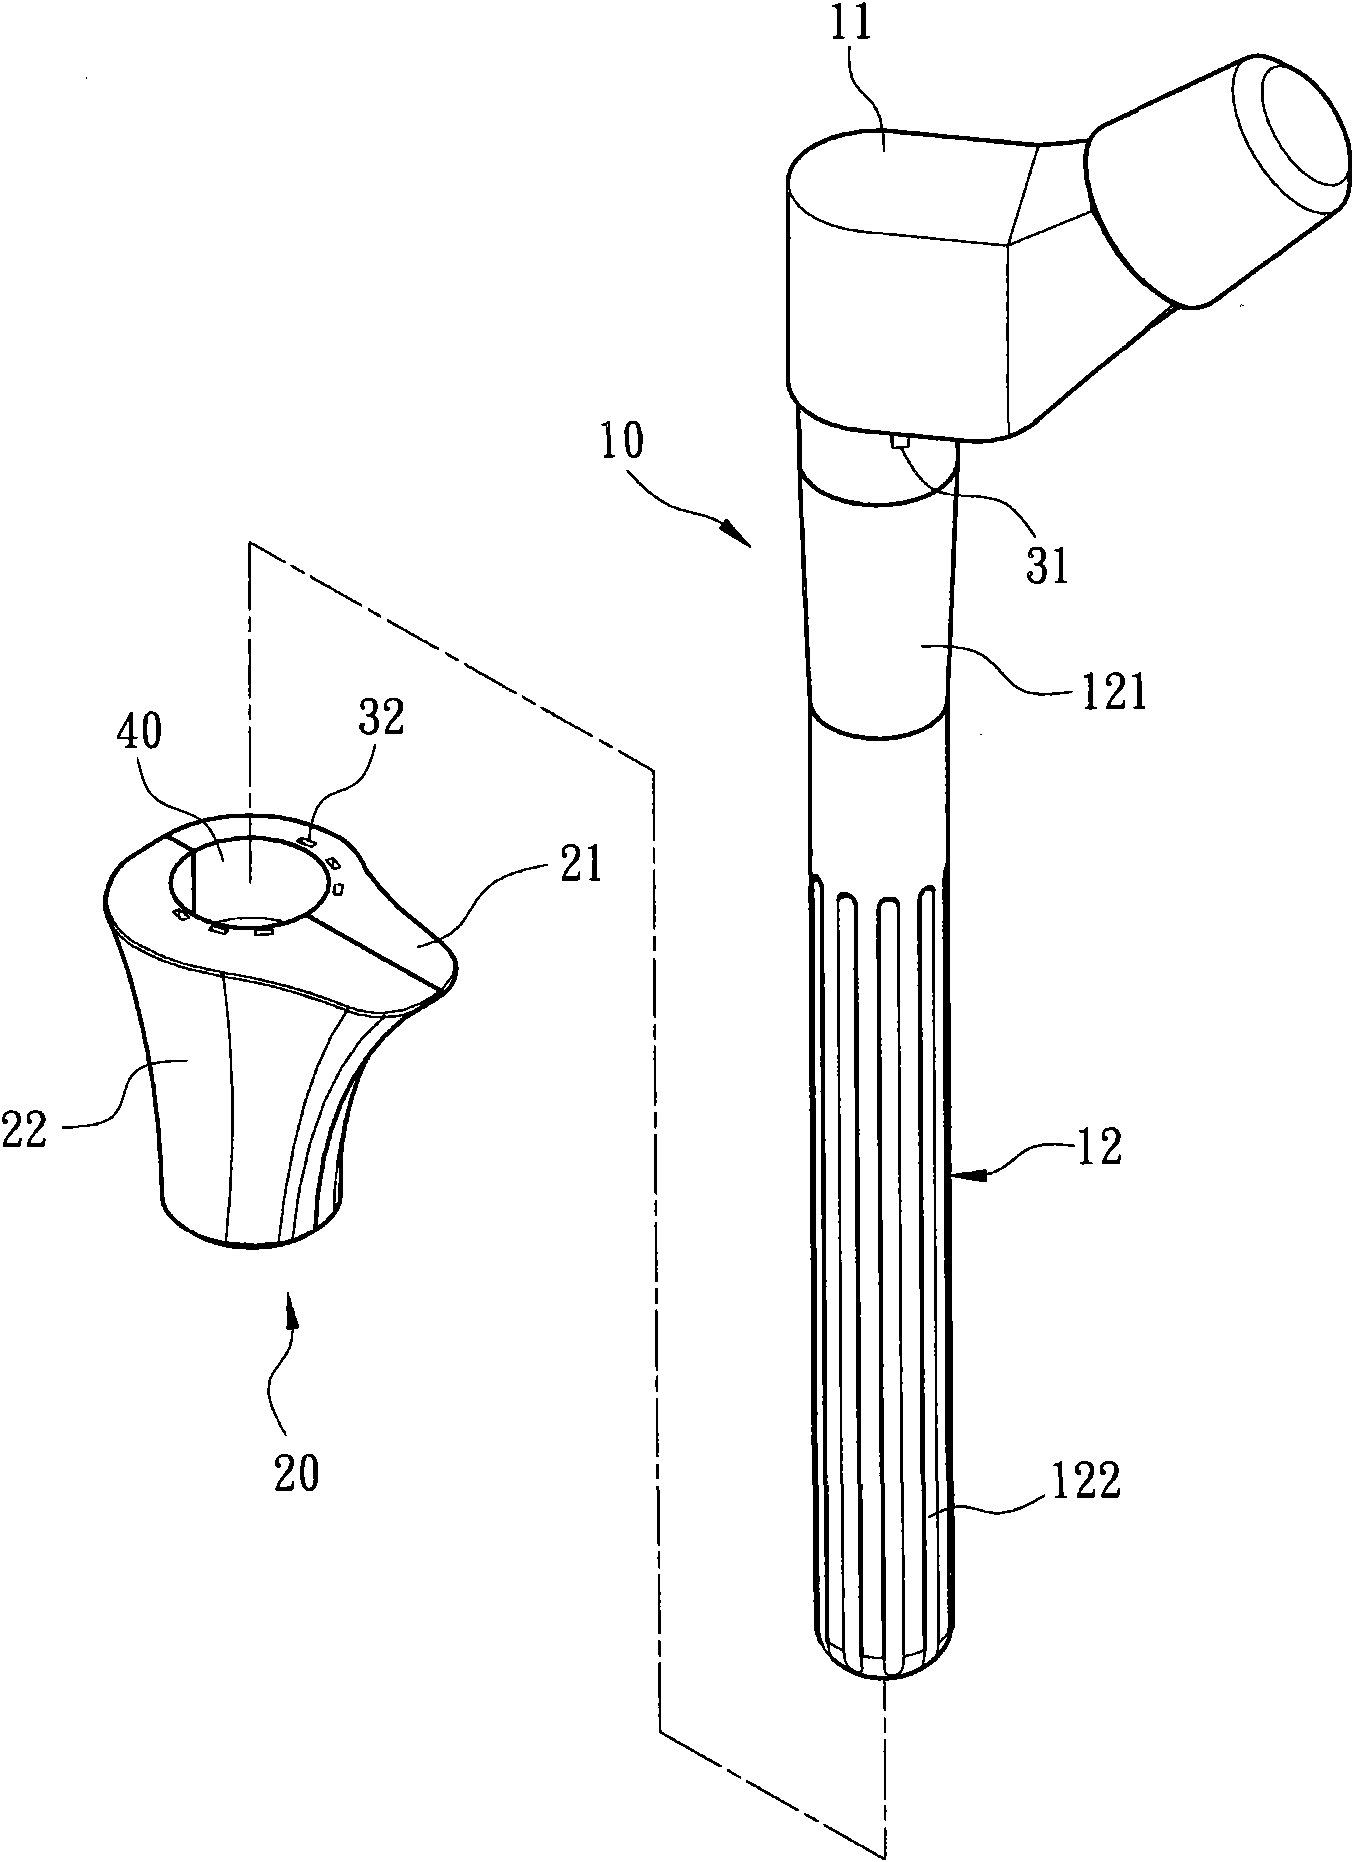 Modularized artificial hip joint femoral shaft